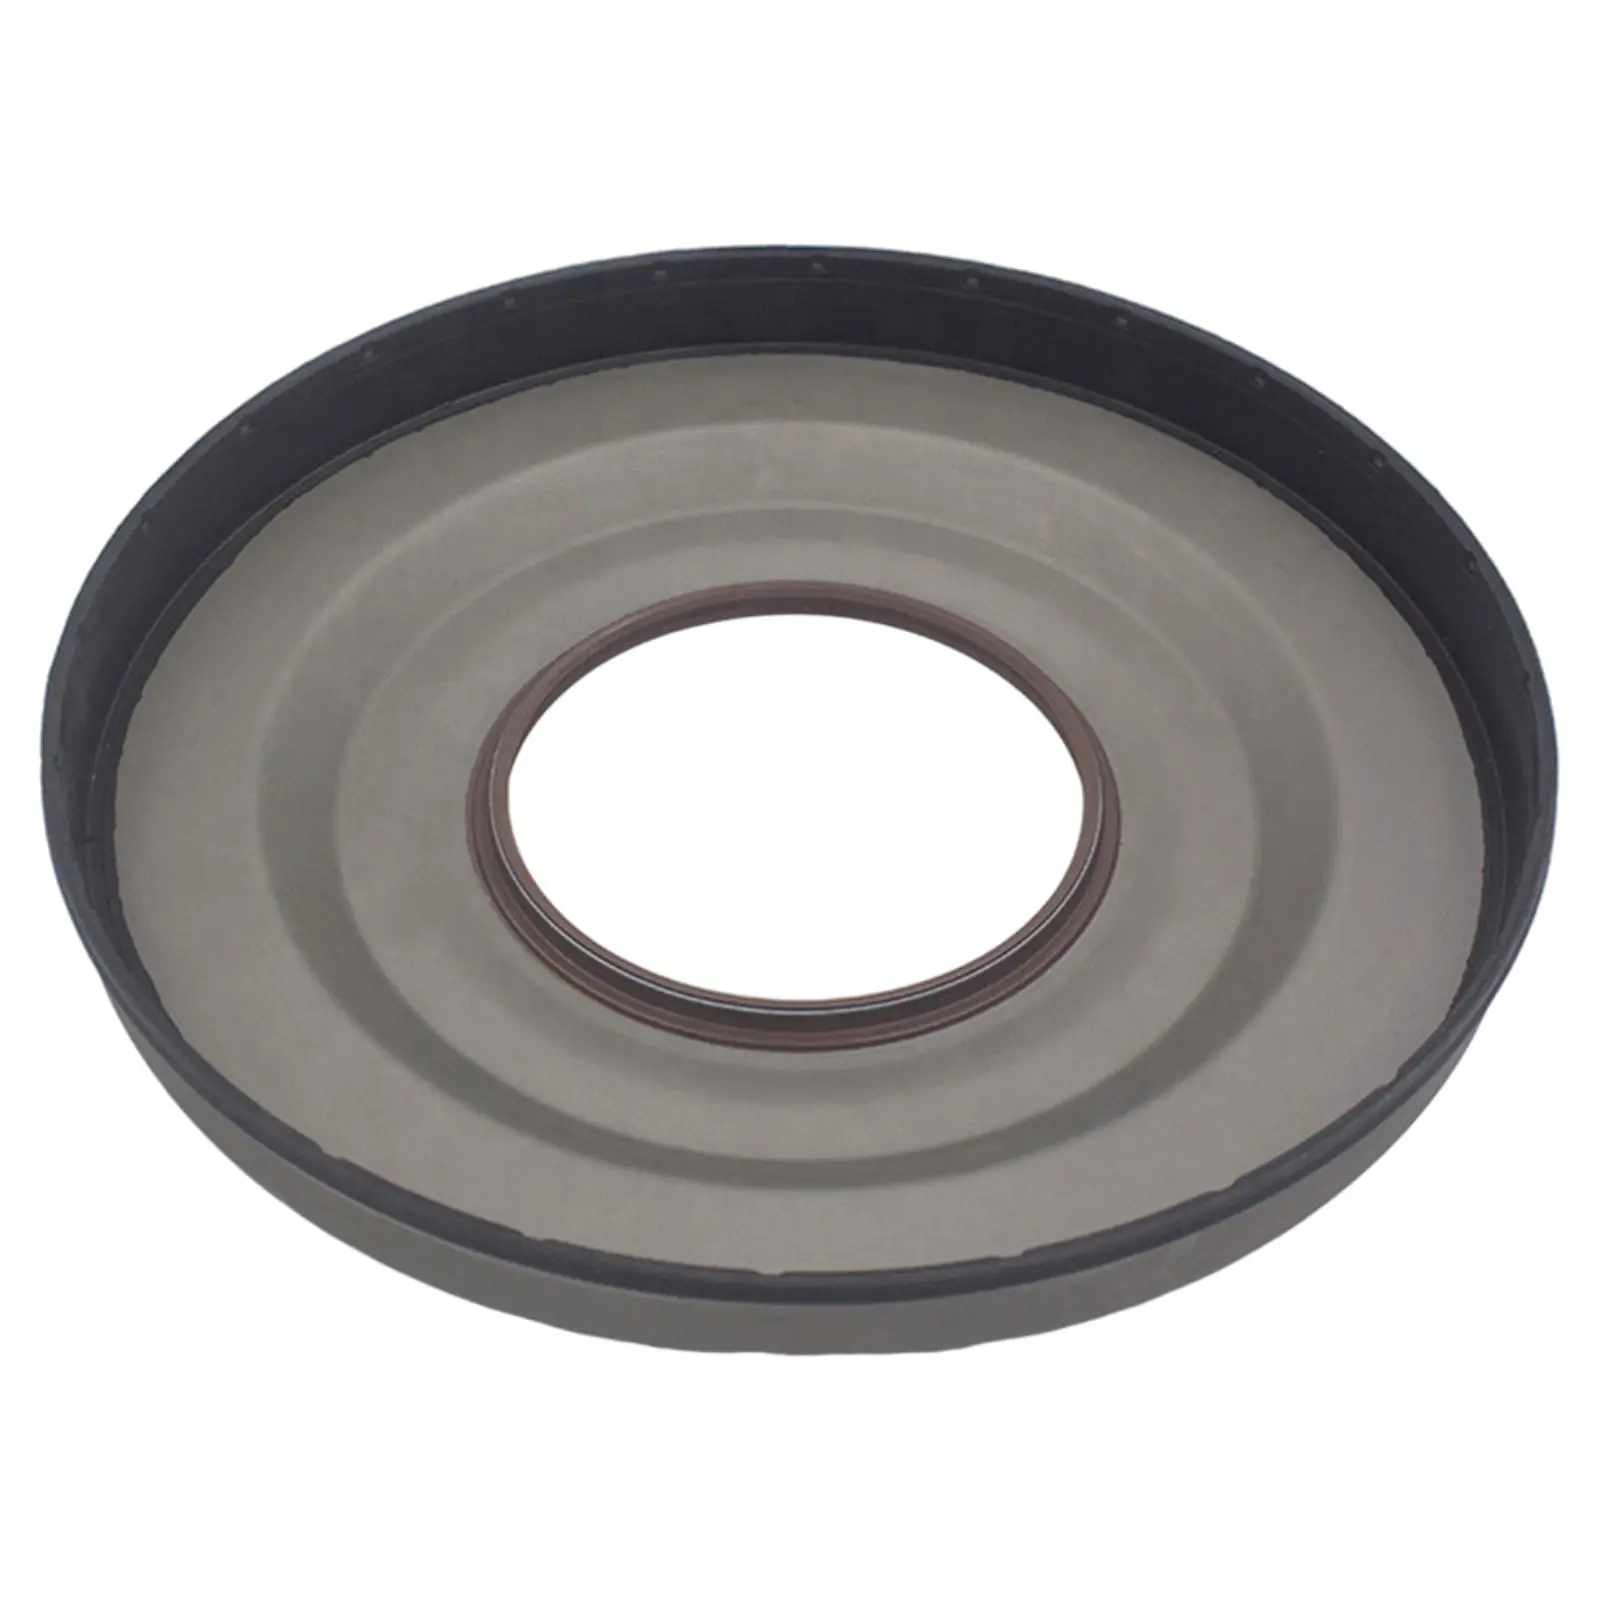 Transmission Front Clutch Cover Oil Seal Stainless Steel Fits for Volvo 6DCT450 Accessories